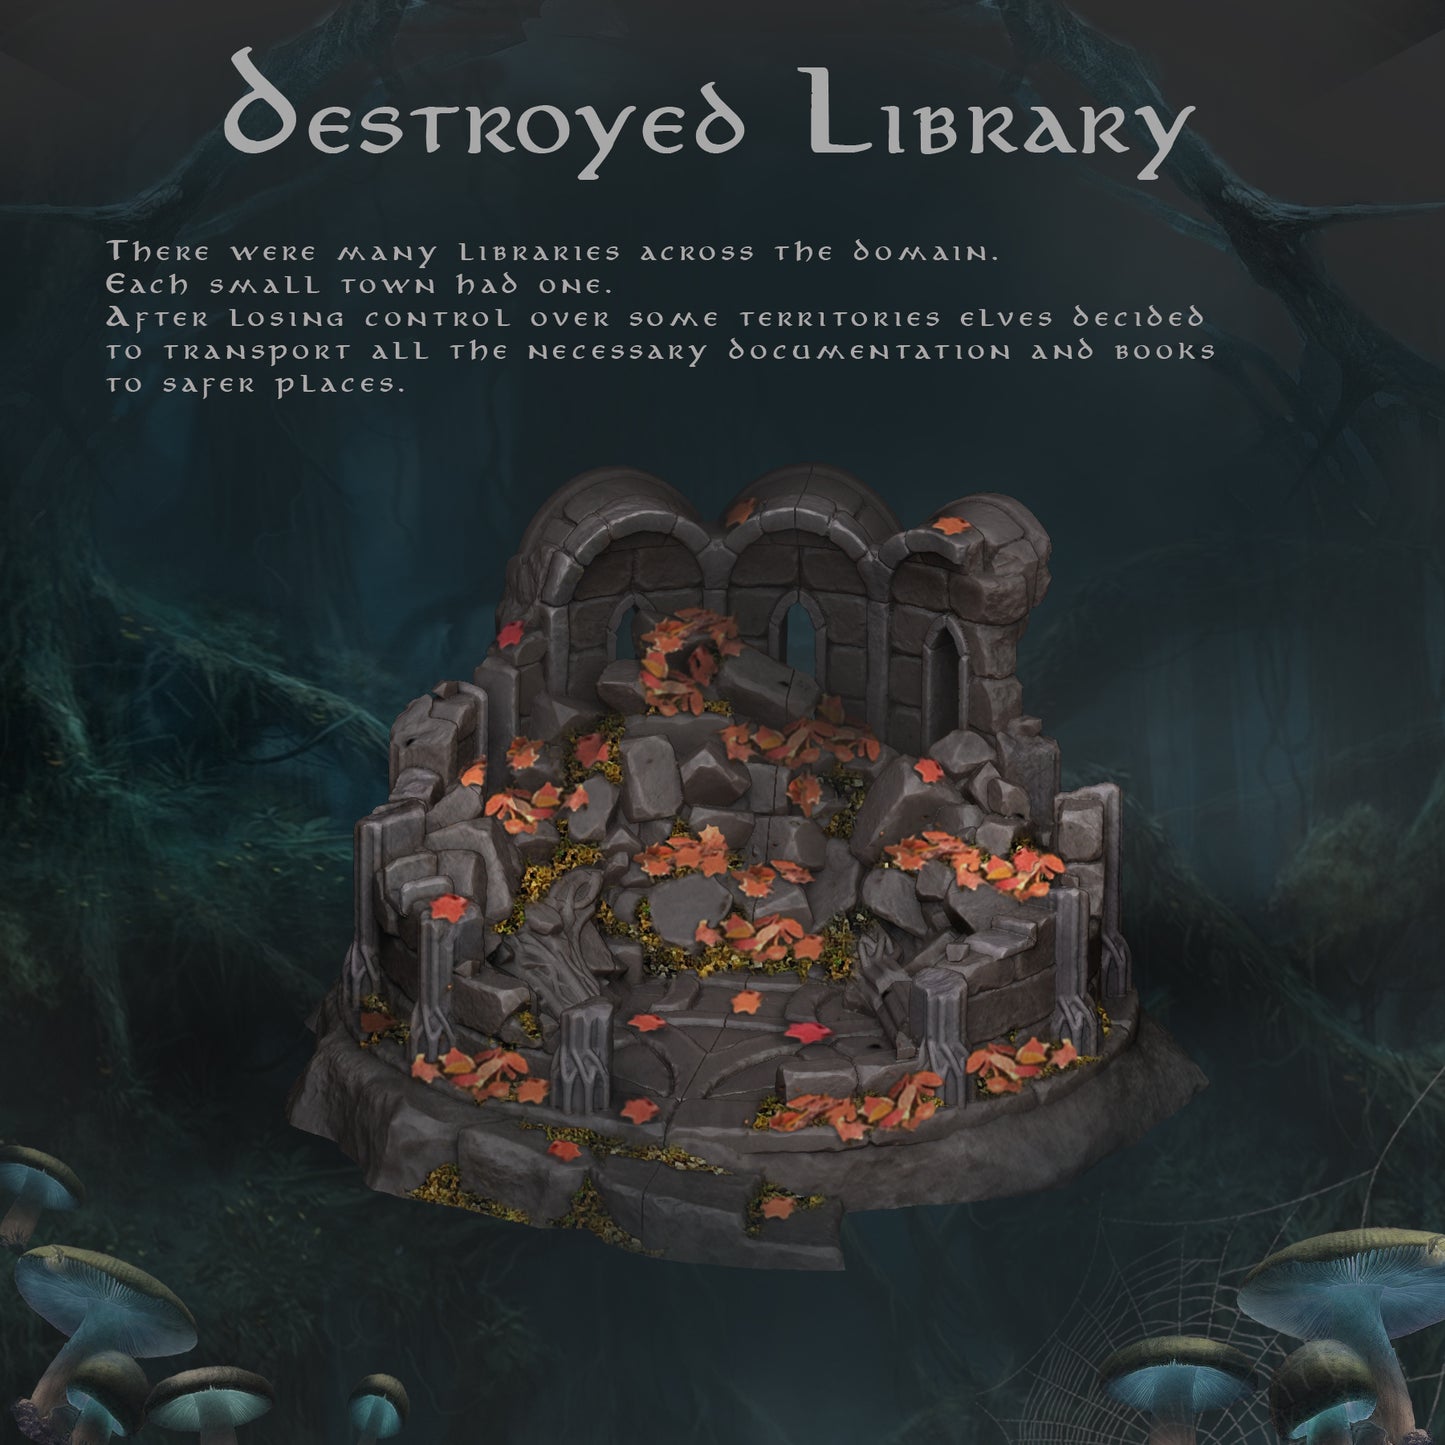 Elven Library Destroyed